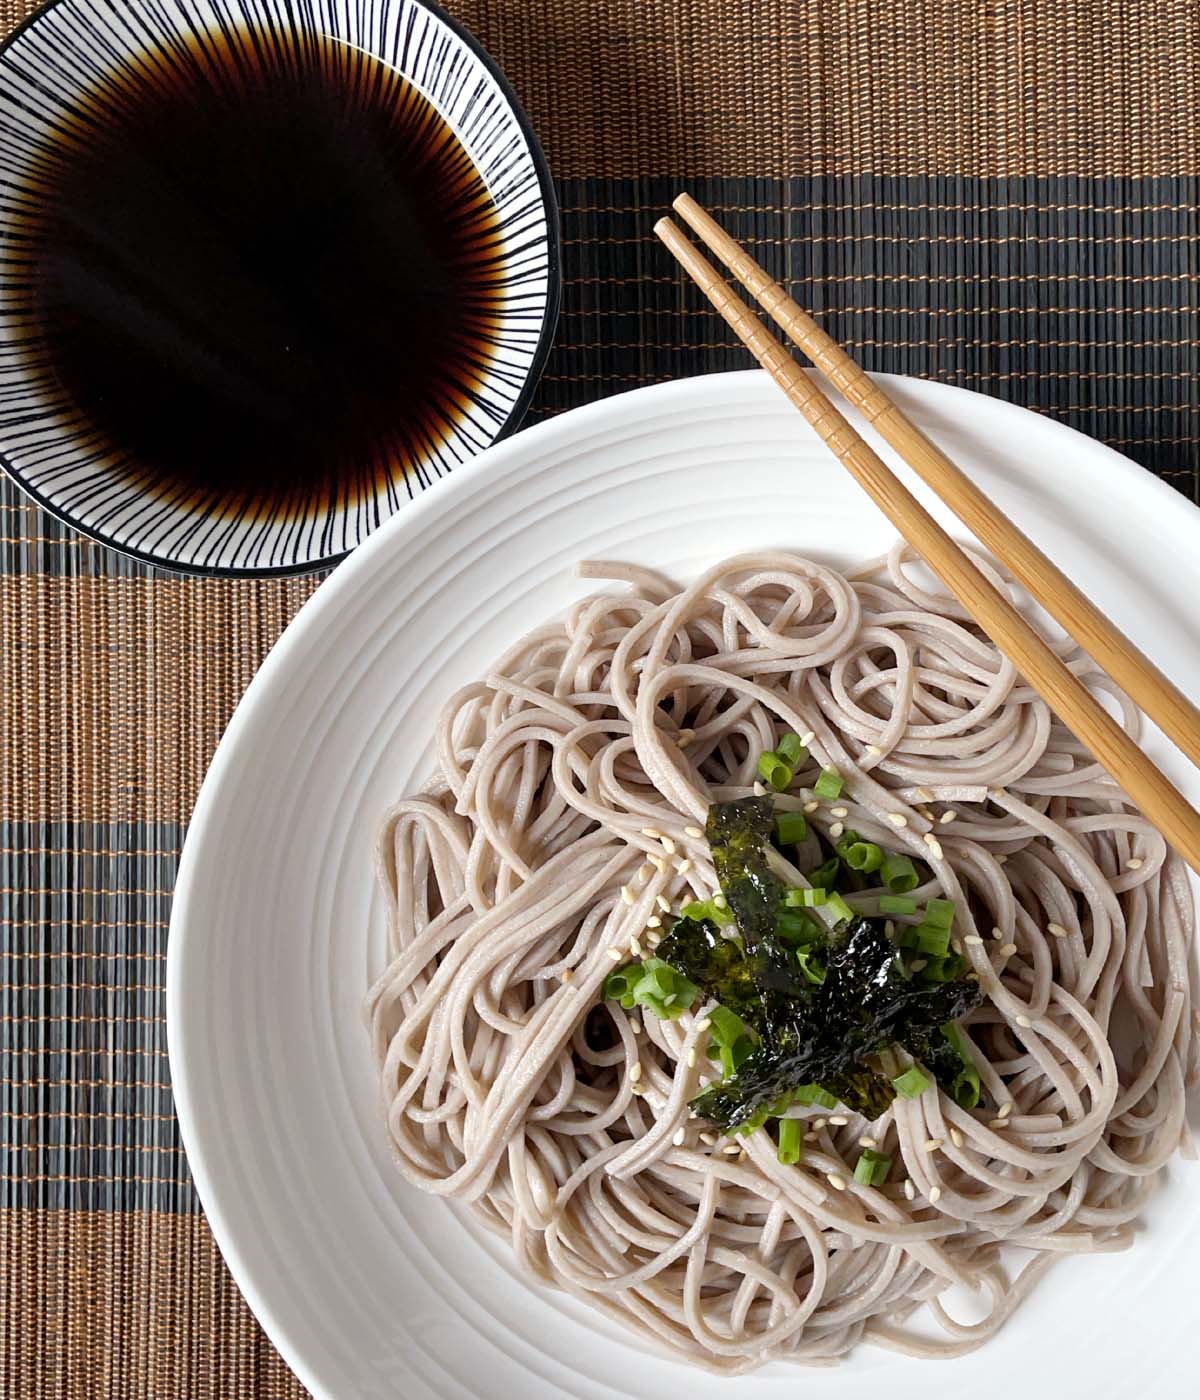 A pair of wooden chopsticks resting on a white plate containing soba noodles. A small black and white bowl containing dark liquid.